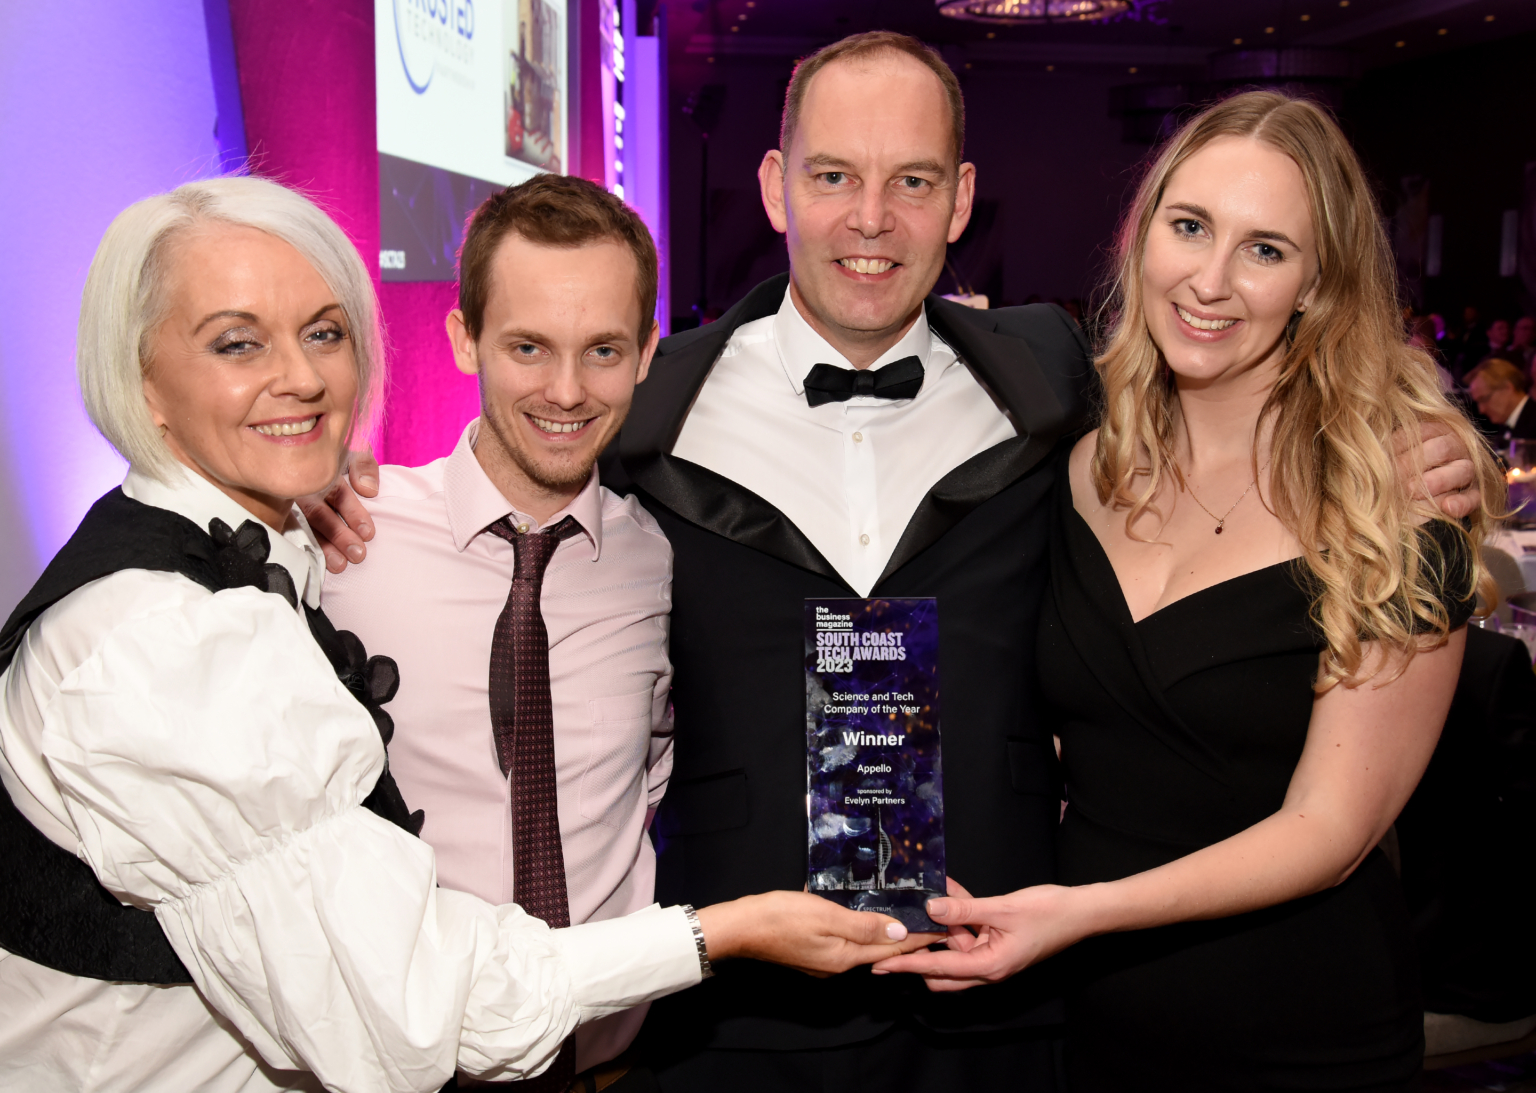 Carl Atkey and his team at Apello, winners of Science and Technology Company of the Year